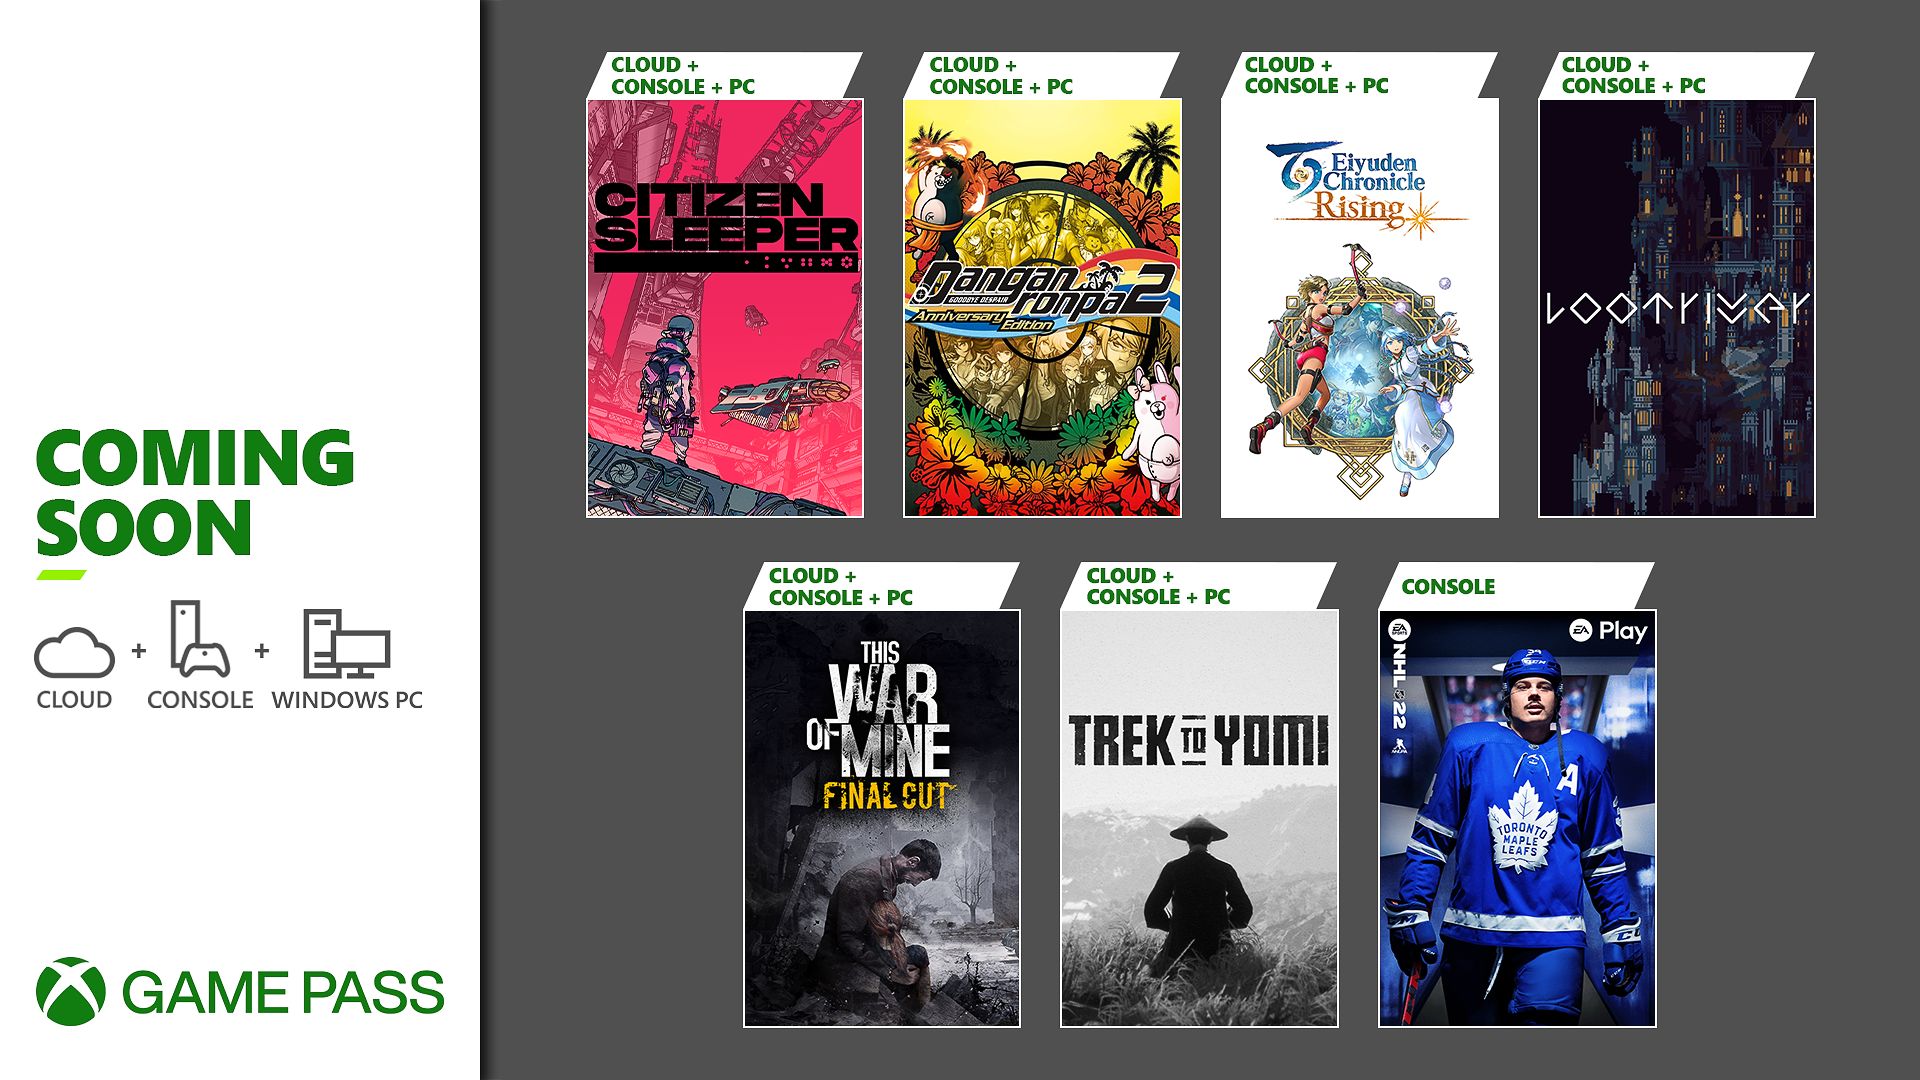 Image of Xbox Game Pass may 2022 games